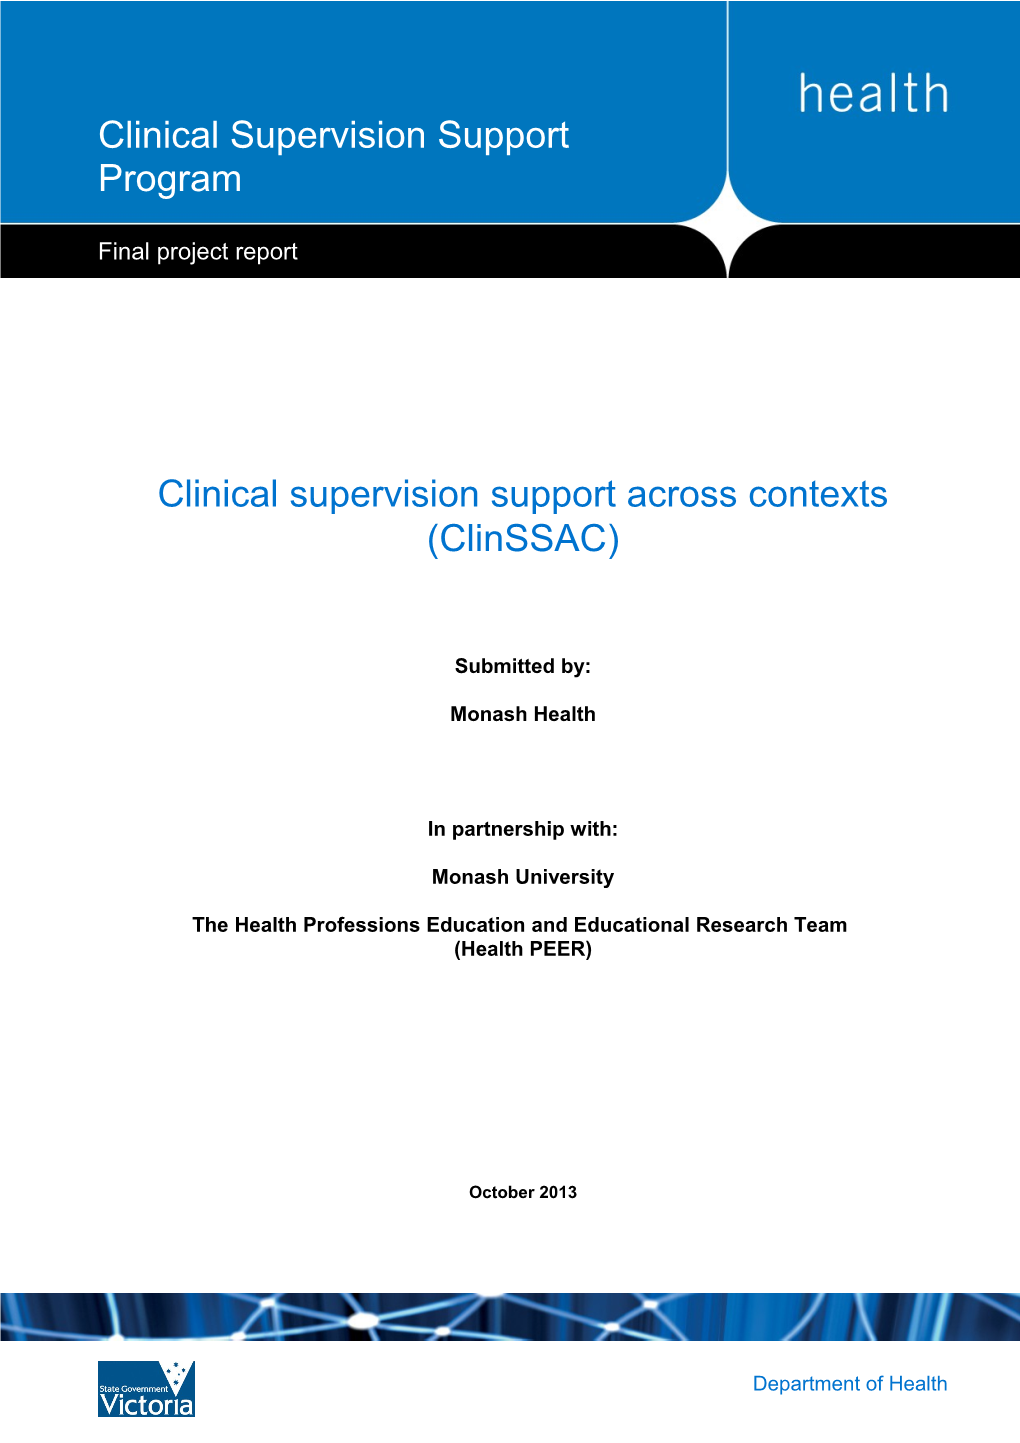 Clinical Supervision Support Across Contexts (Clinssac)